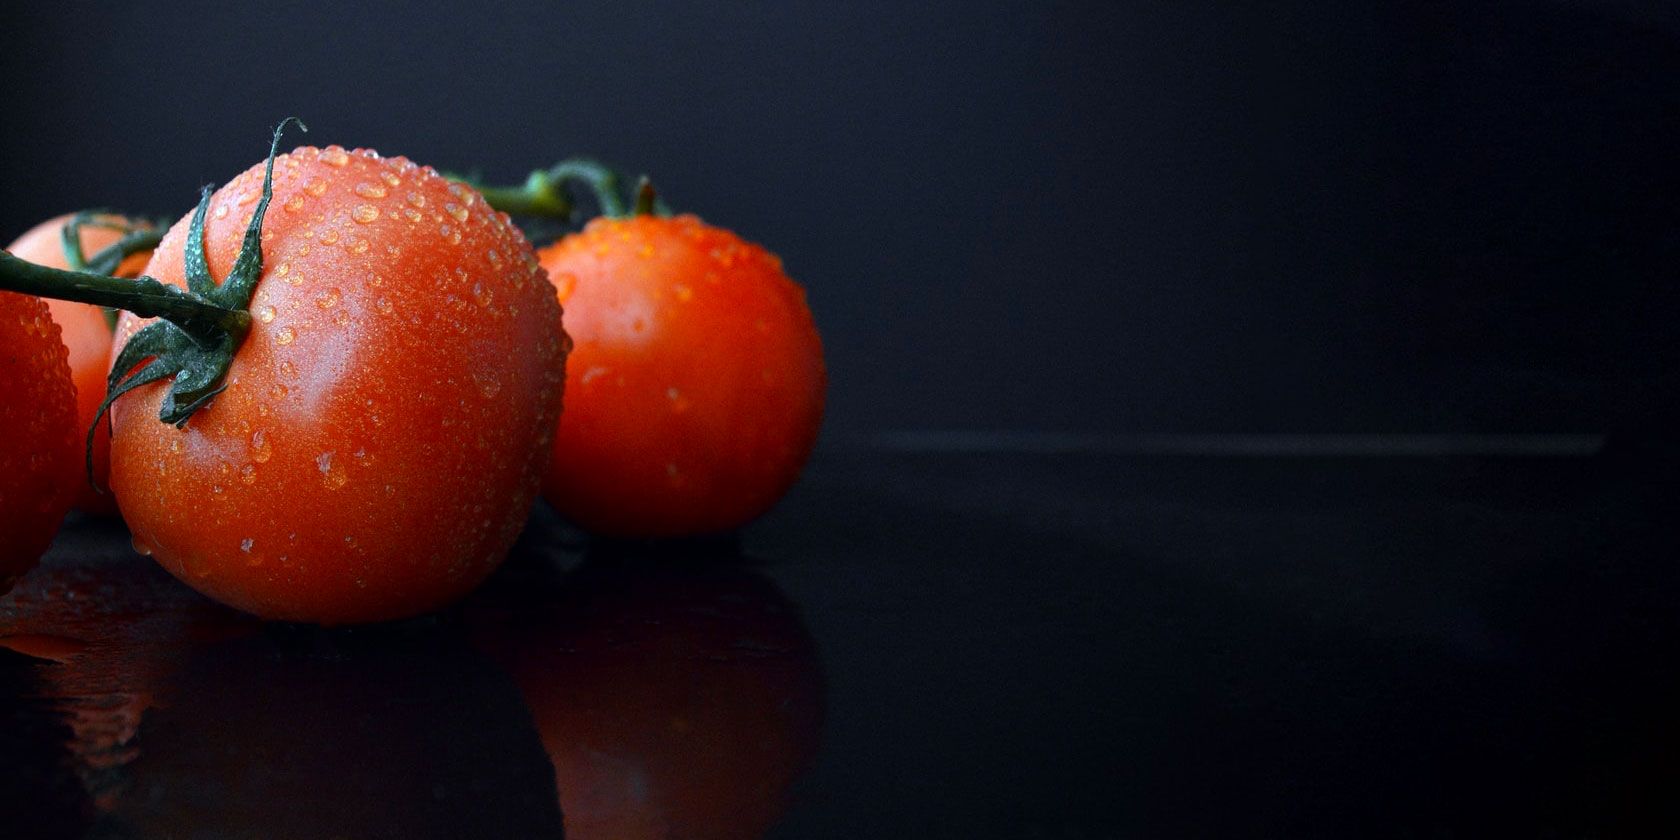 Step Up Your Pomodoro Productivity With These 6 Methods